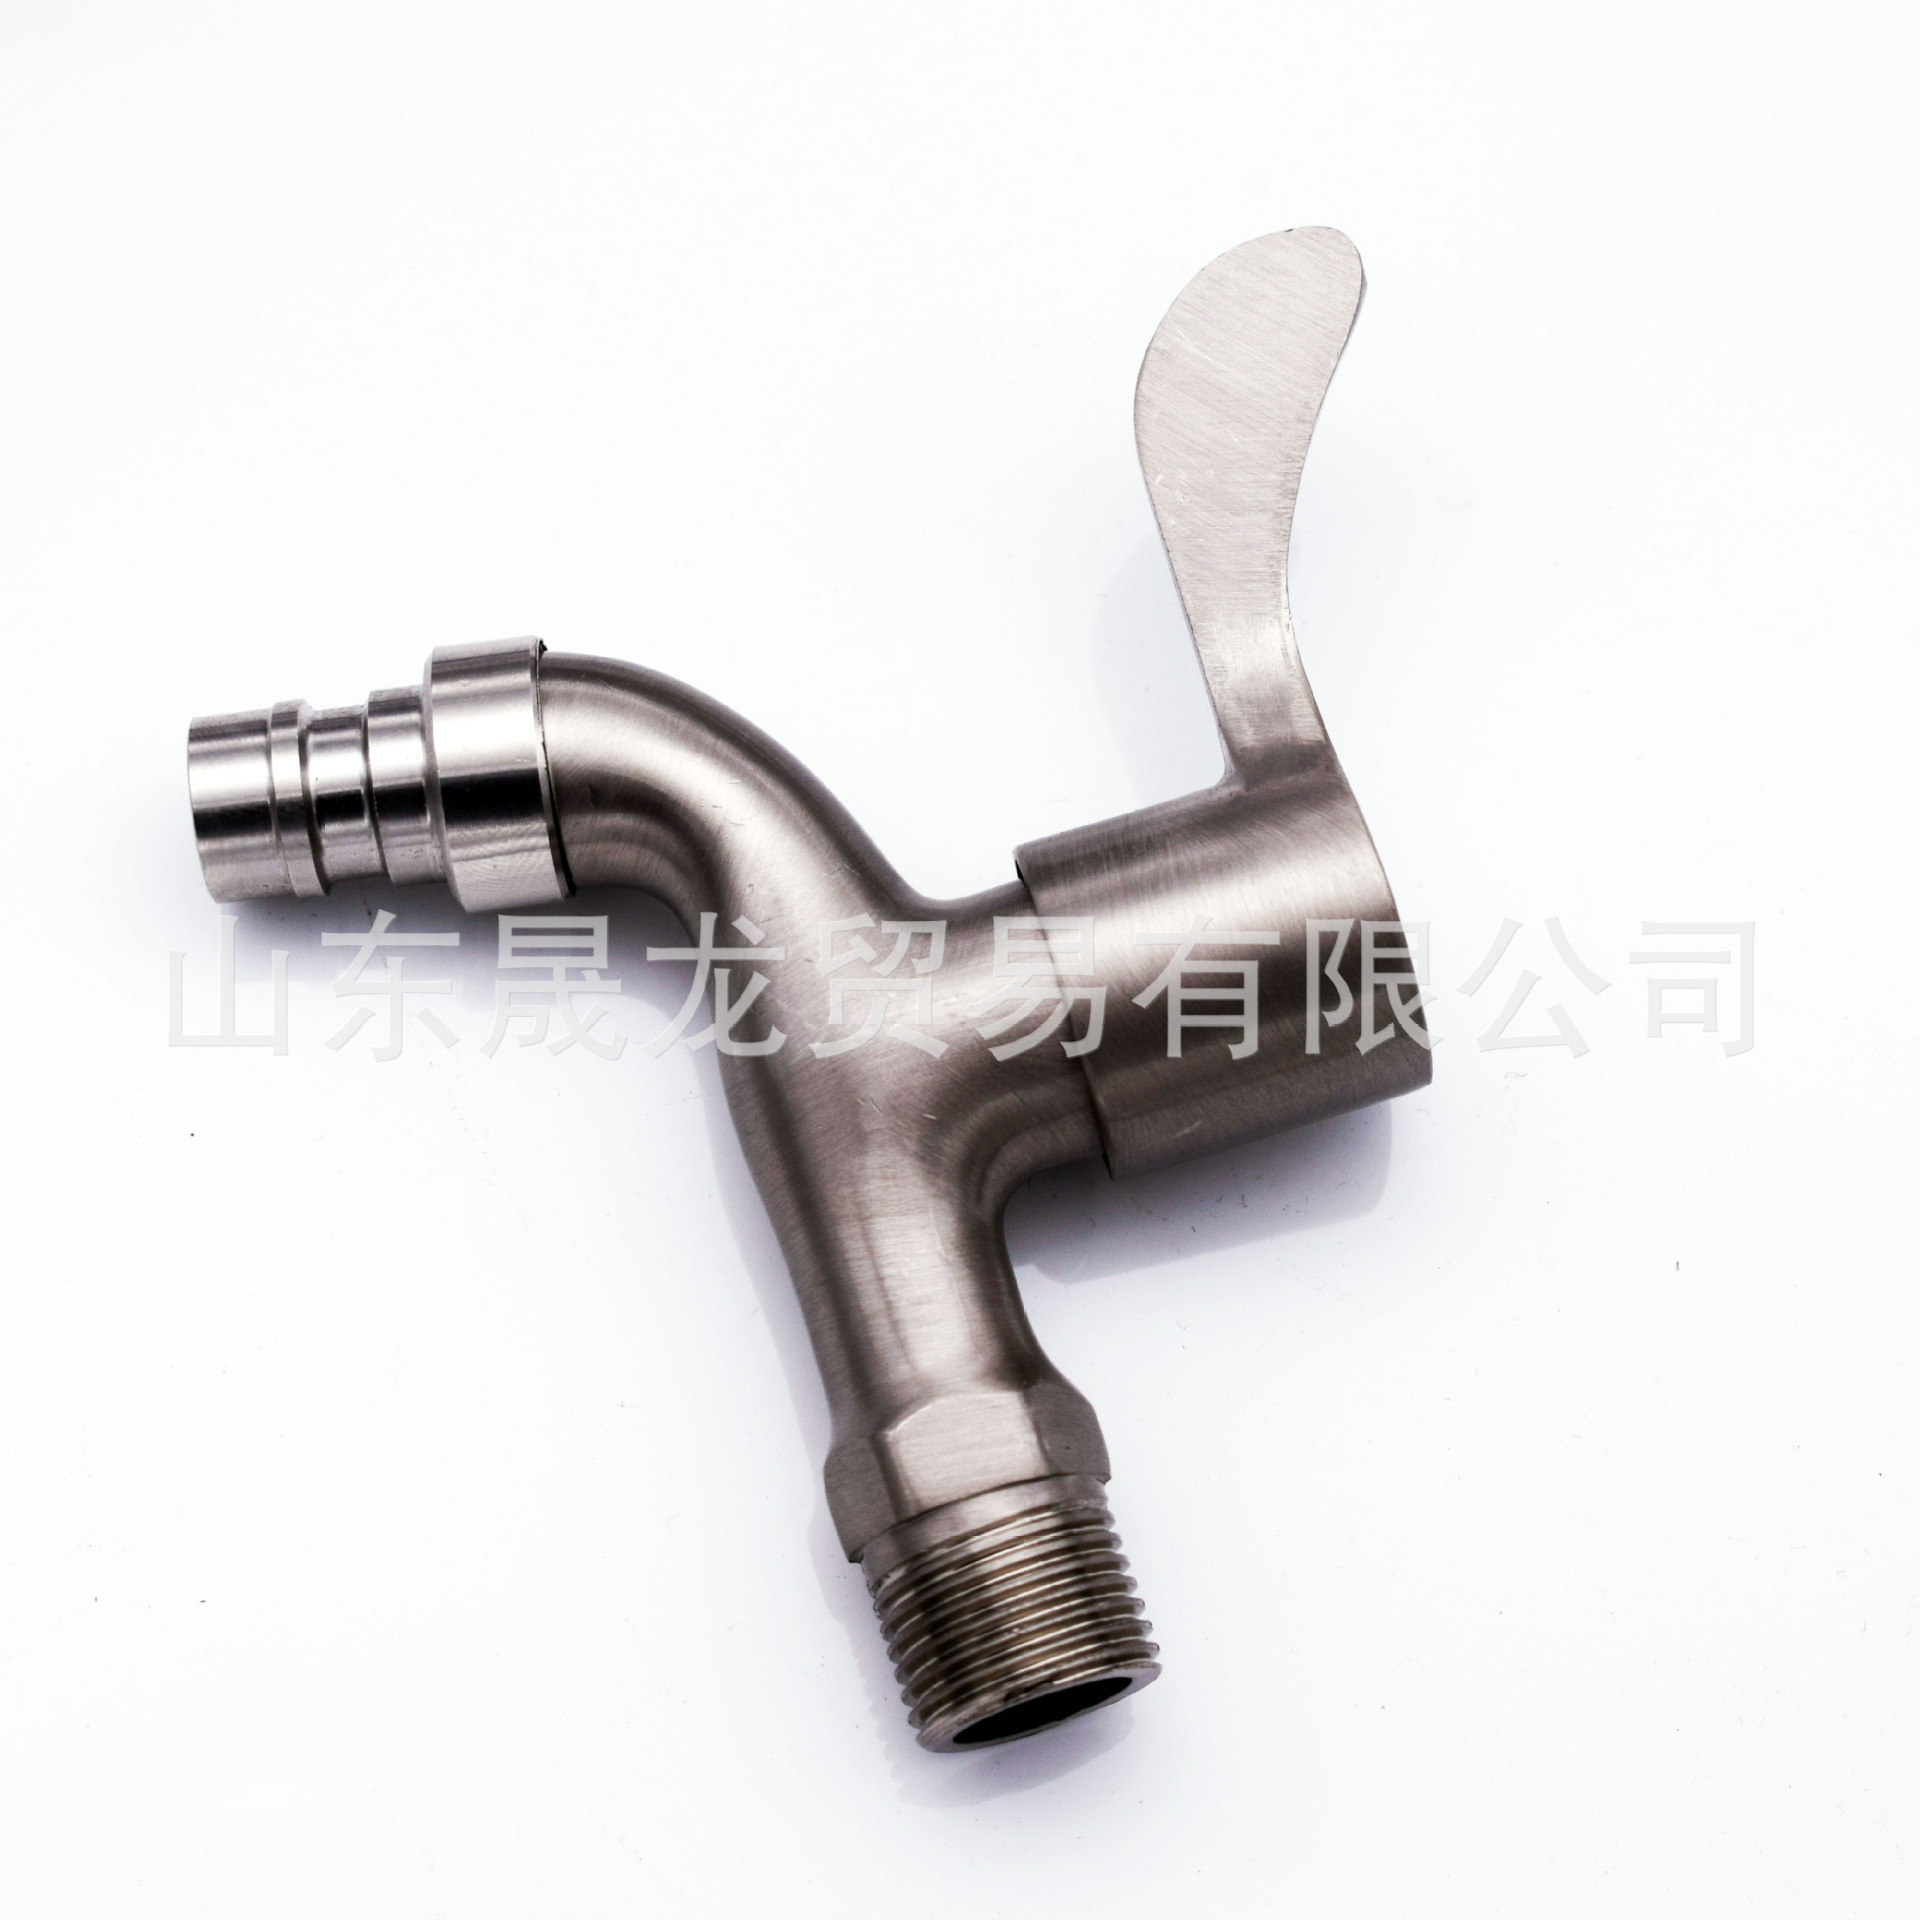 Stainless Steel Zinc Alloy Copper Core Washing Machine Faucet Kitchen Balcony Mop Pool Tap Bibcock